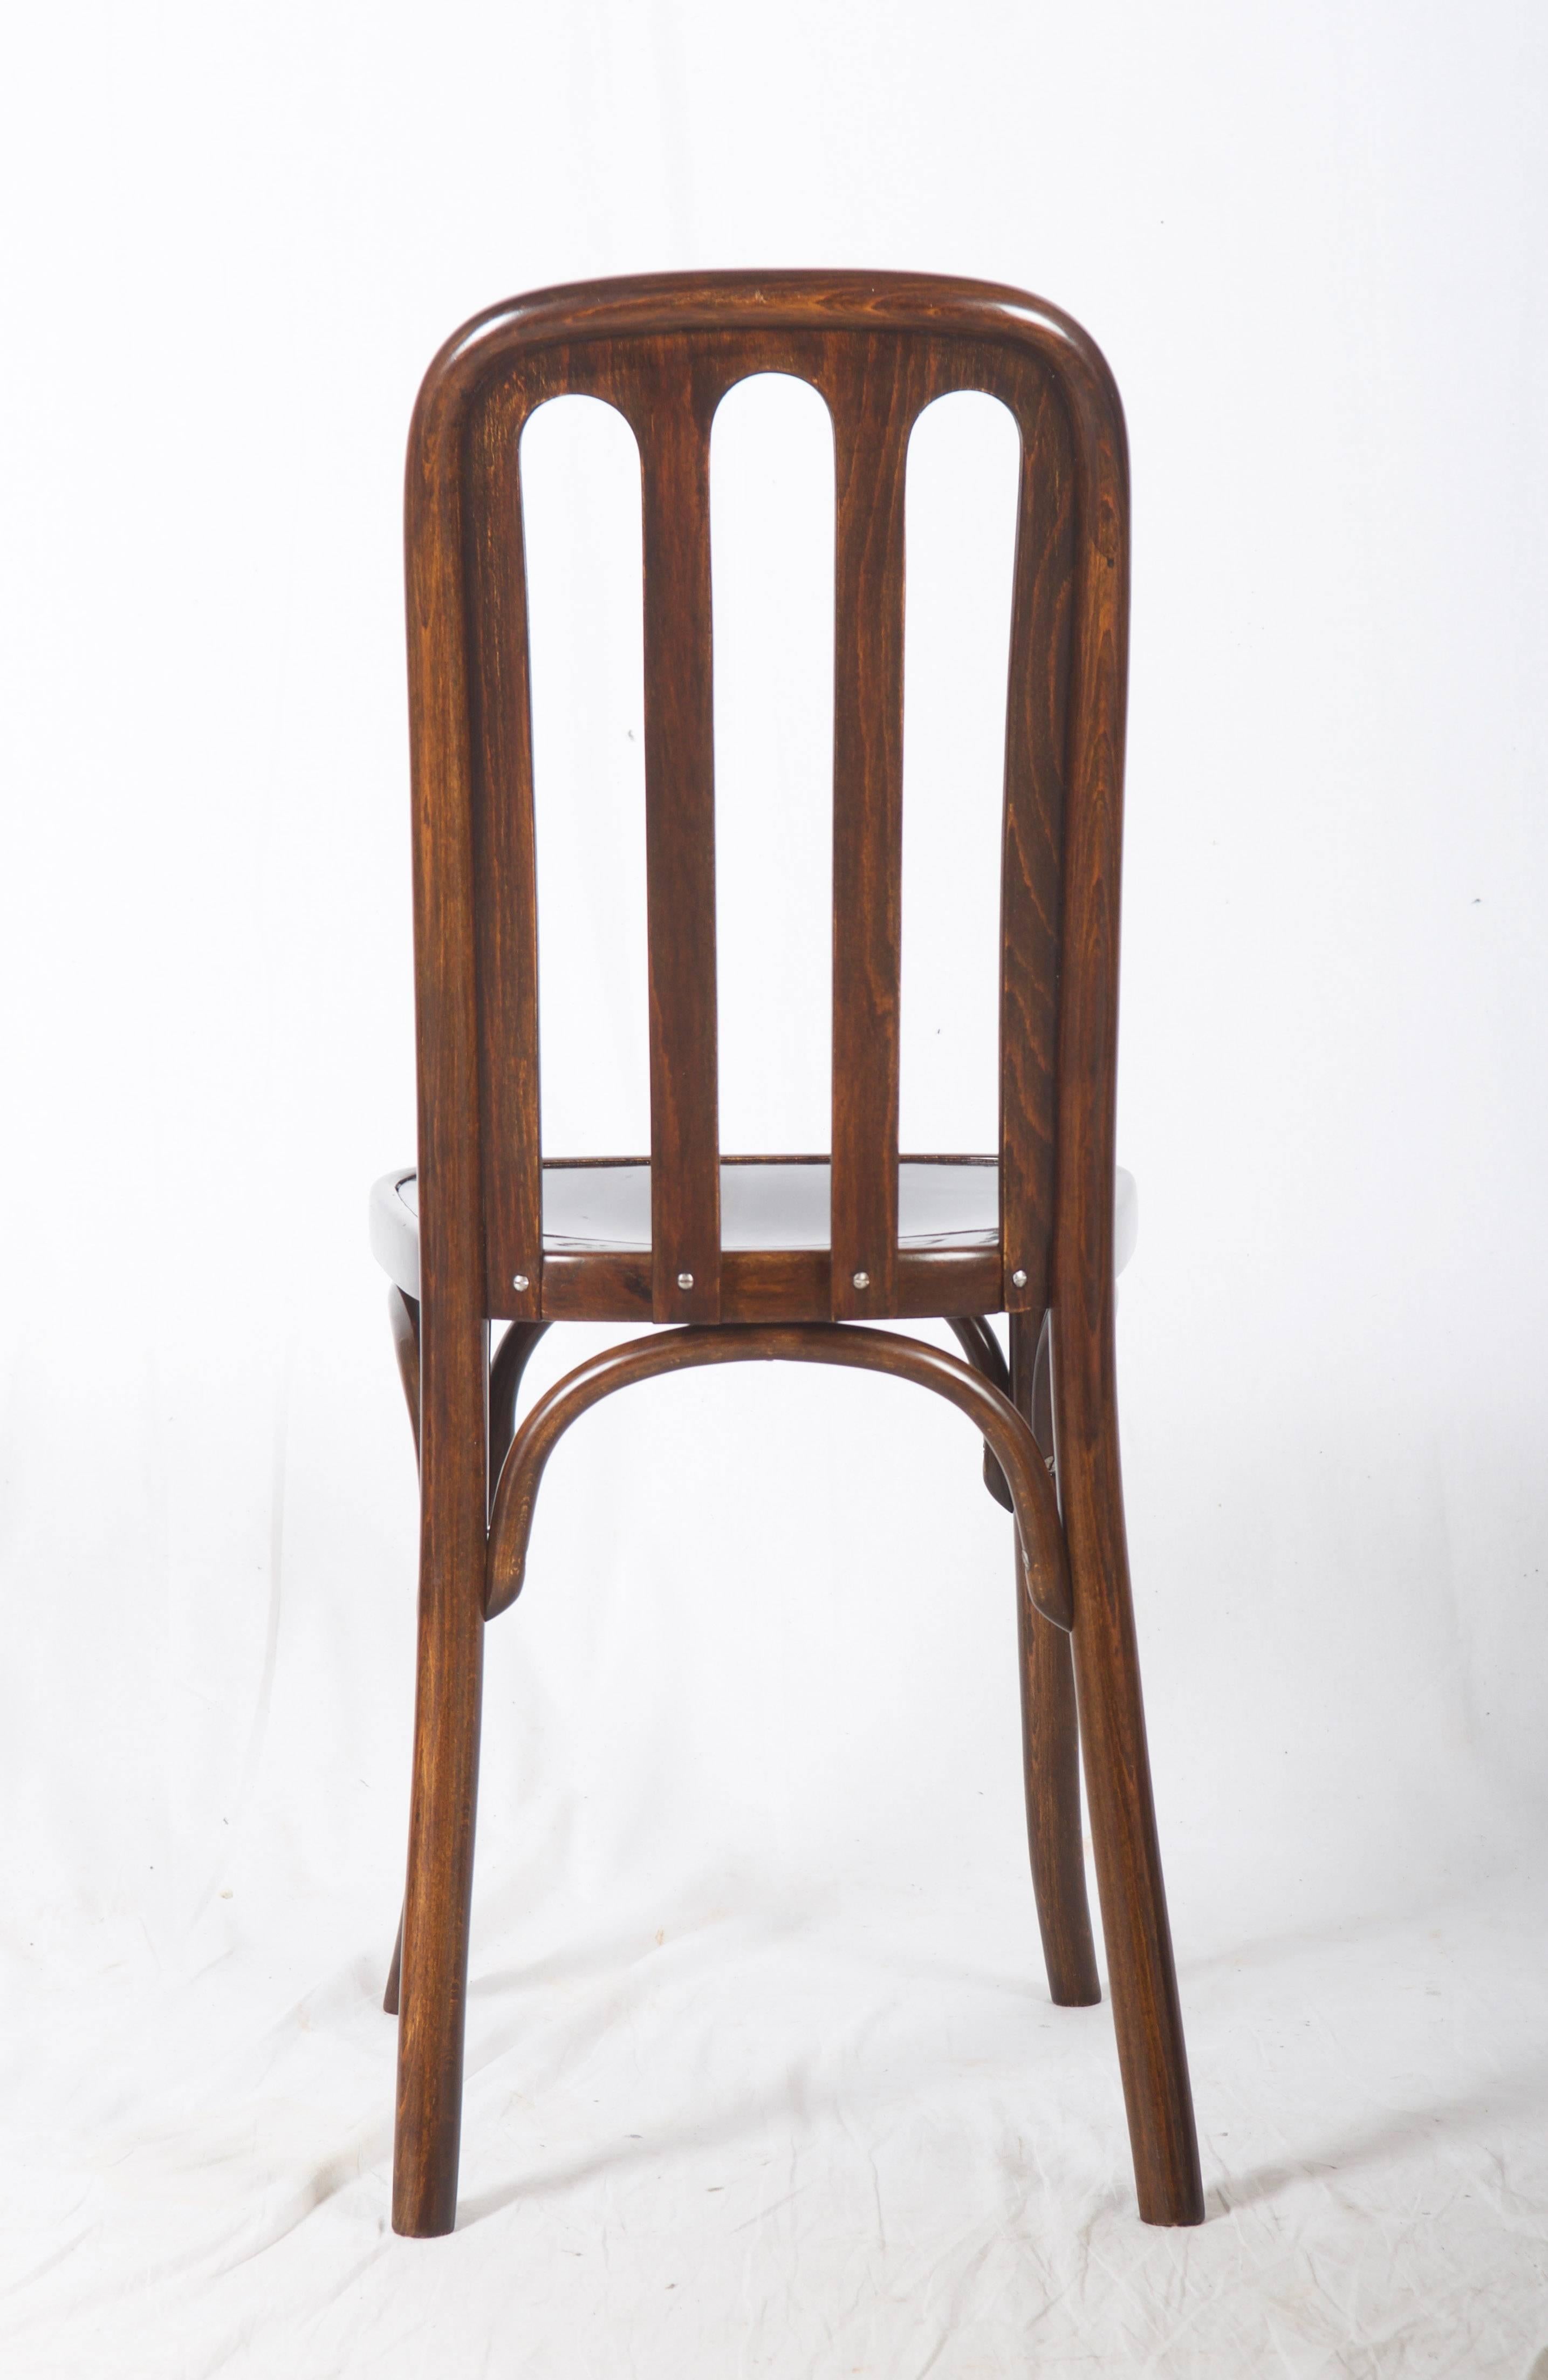 Beech, bentwood with plywood seat and back.
Designed by Josef Hoffmann in 1900-1910 for Thonet.
Perfectly restored, the color can be changed on request.
One price is already restored delivery time for the rest about 4-6 weeks.
Up to six